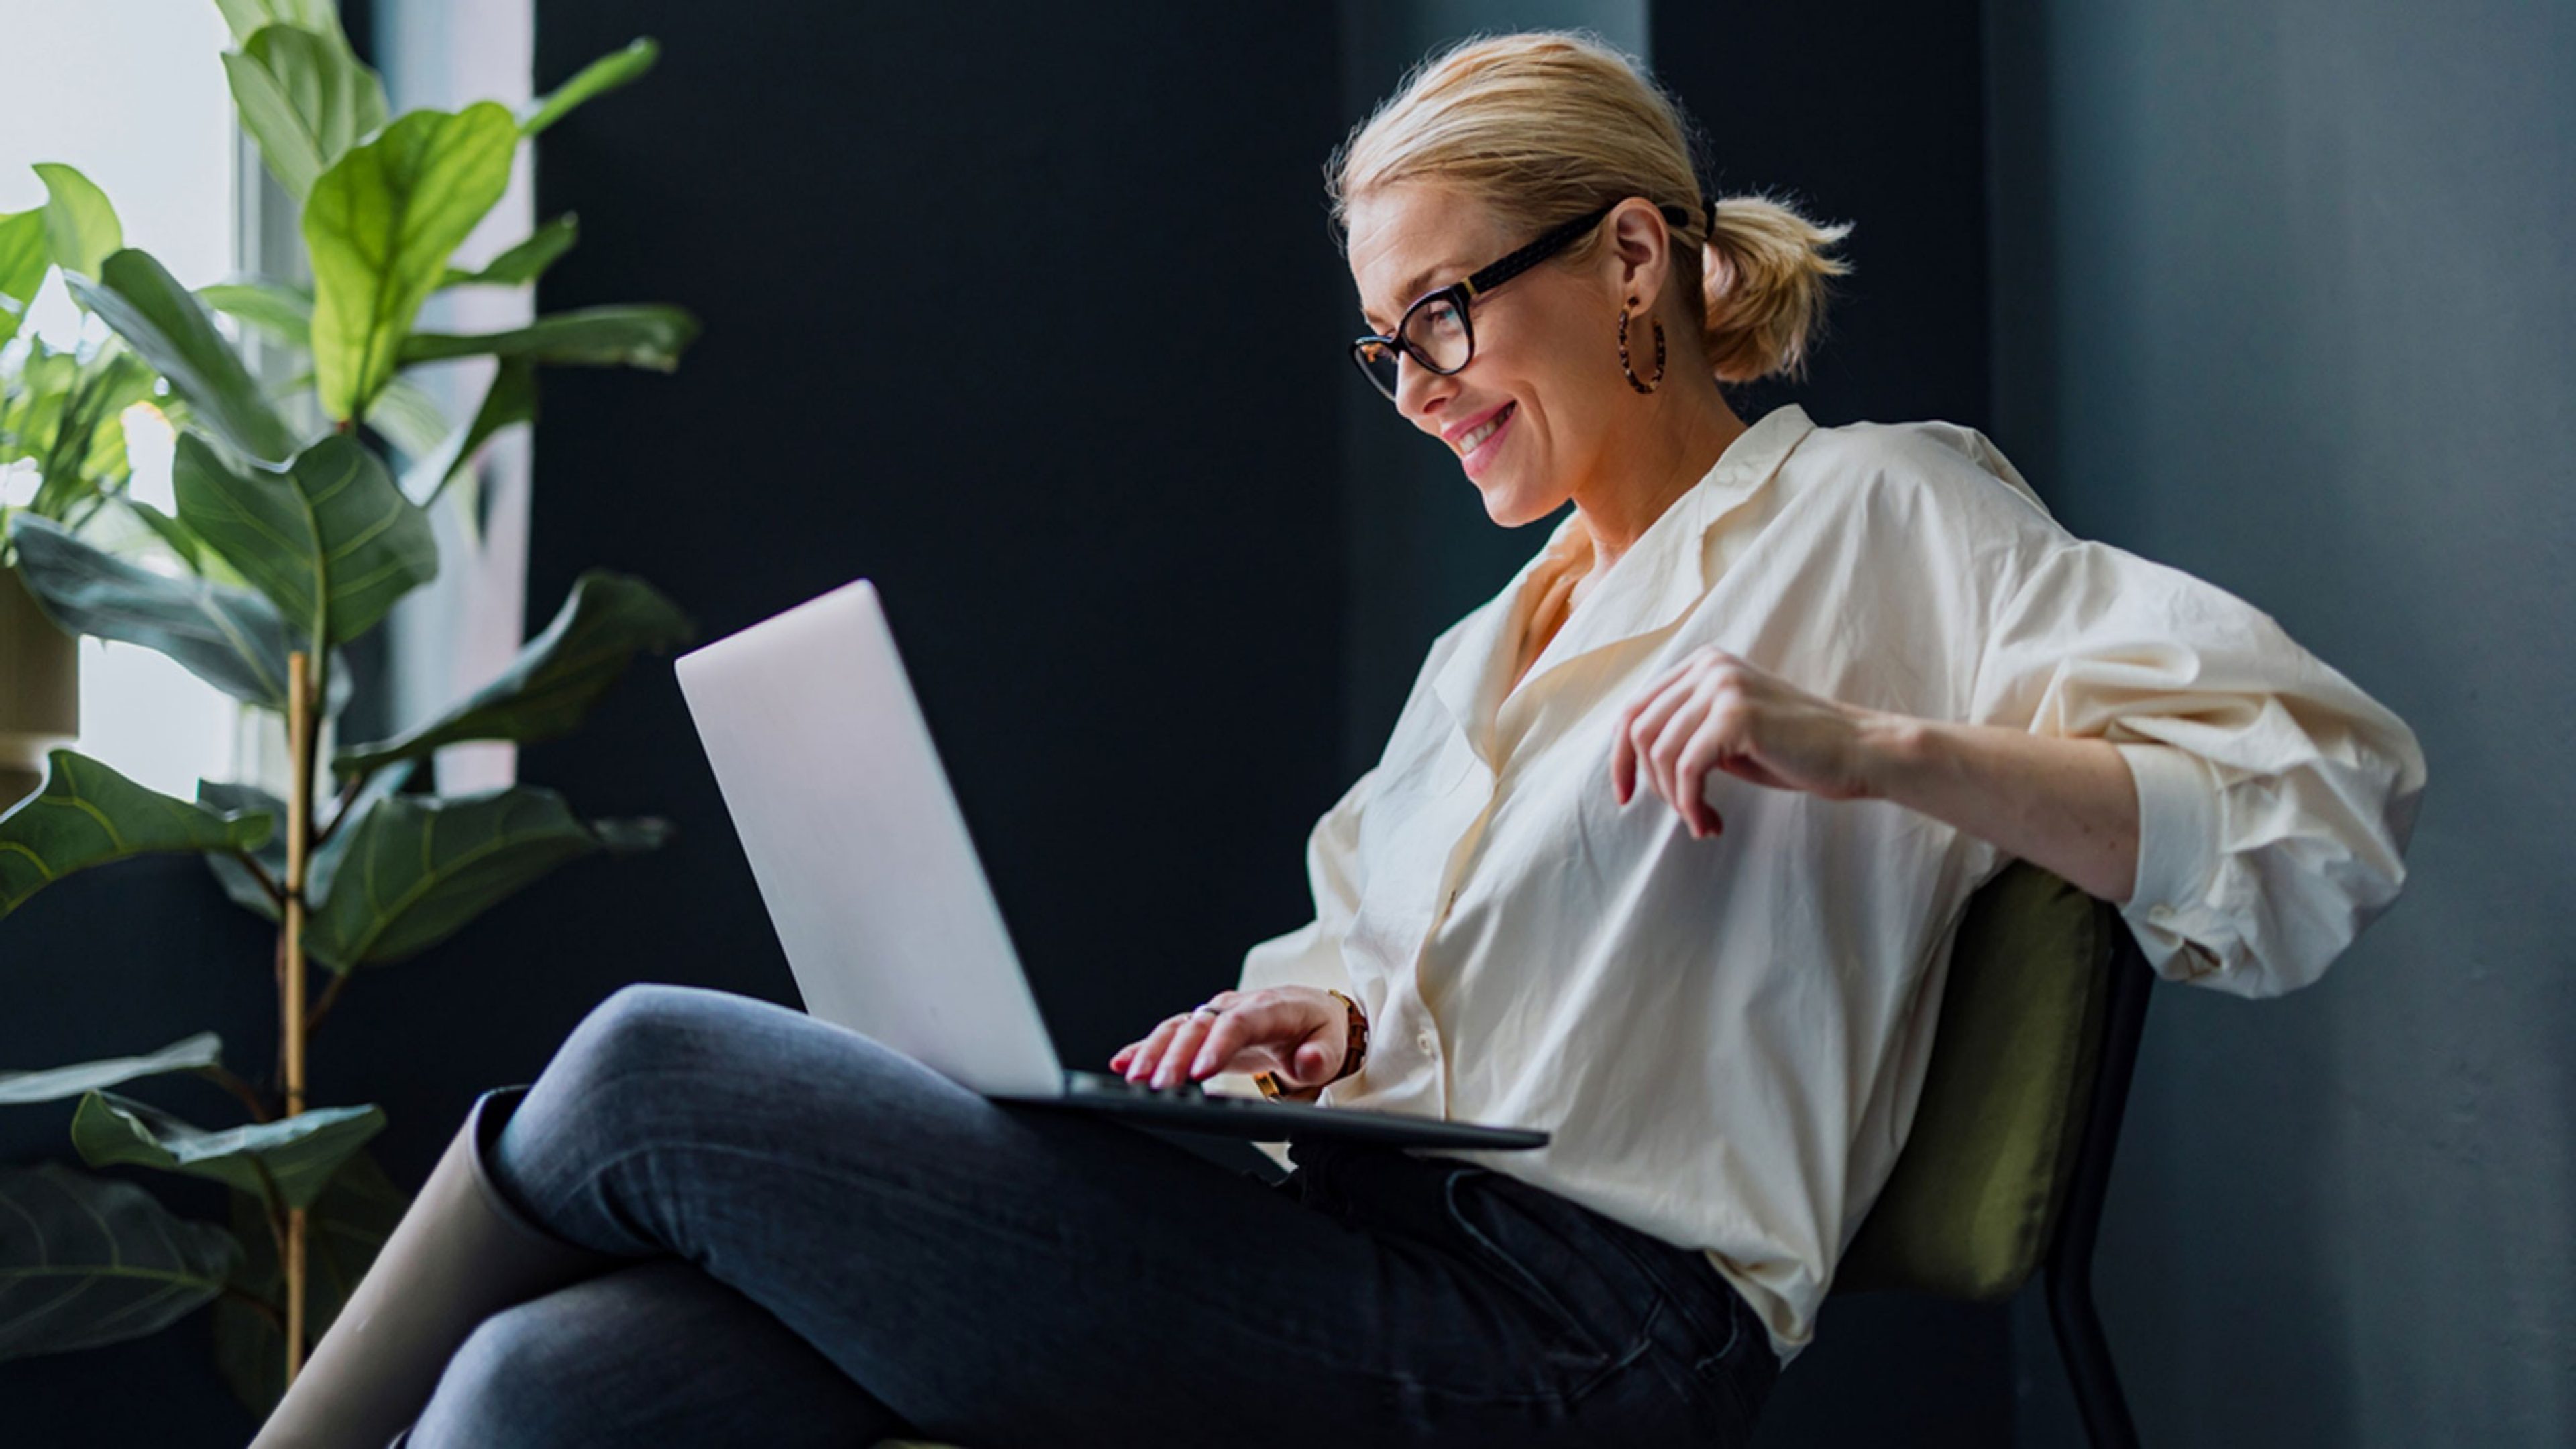 A woman wearing glasses and earrings is sitting on a chair with a laptop on her knee